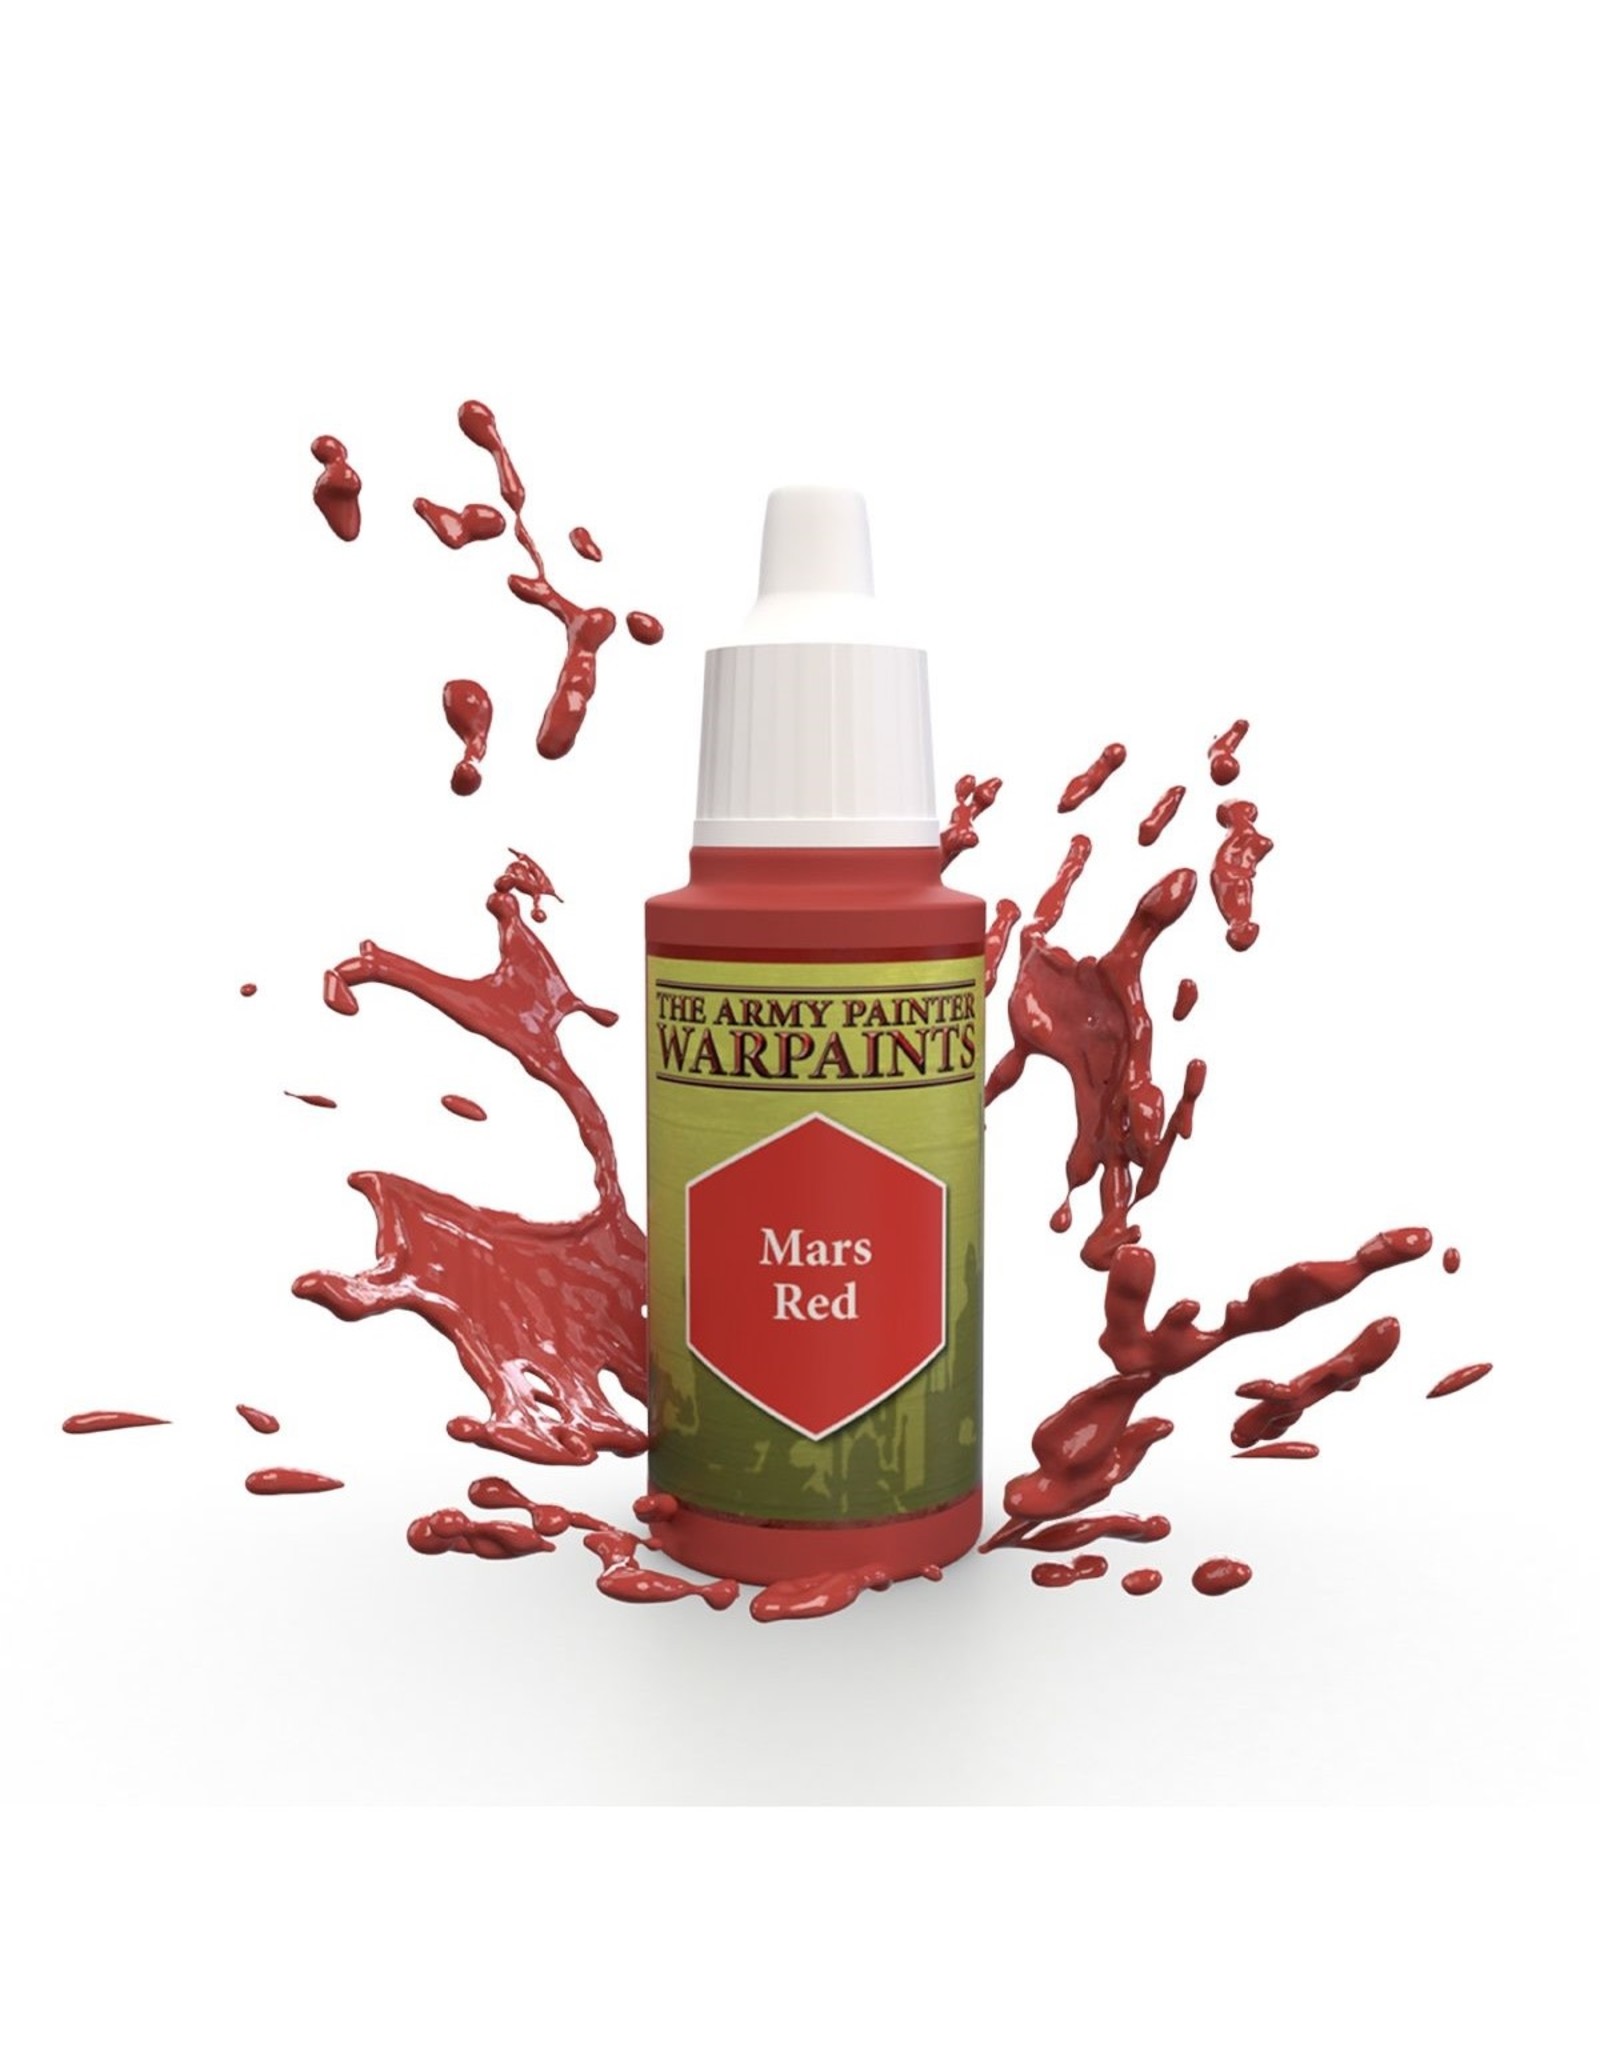 The Army Painter Warpaint: Mars Red (18ml)